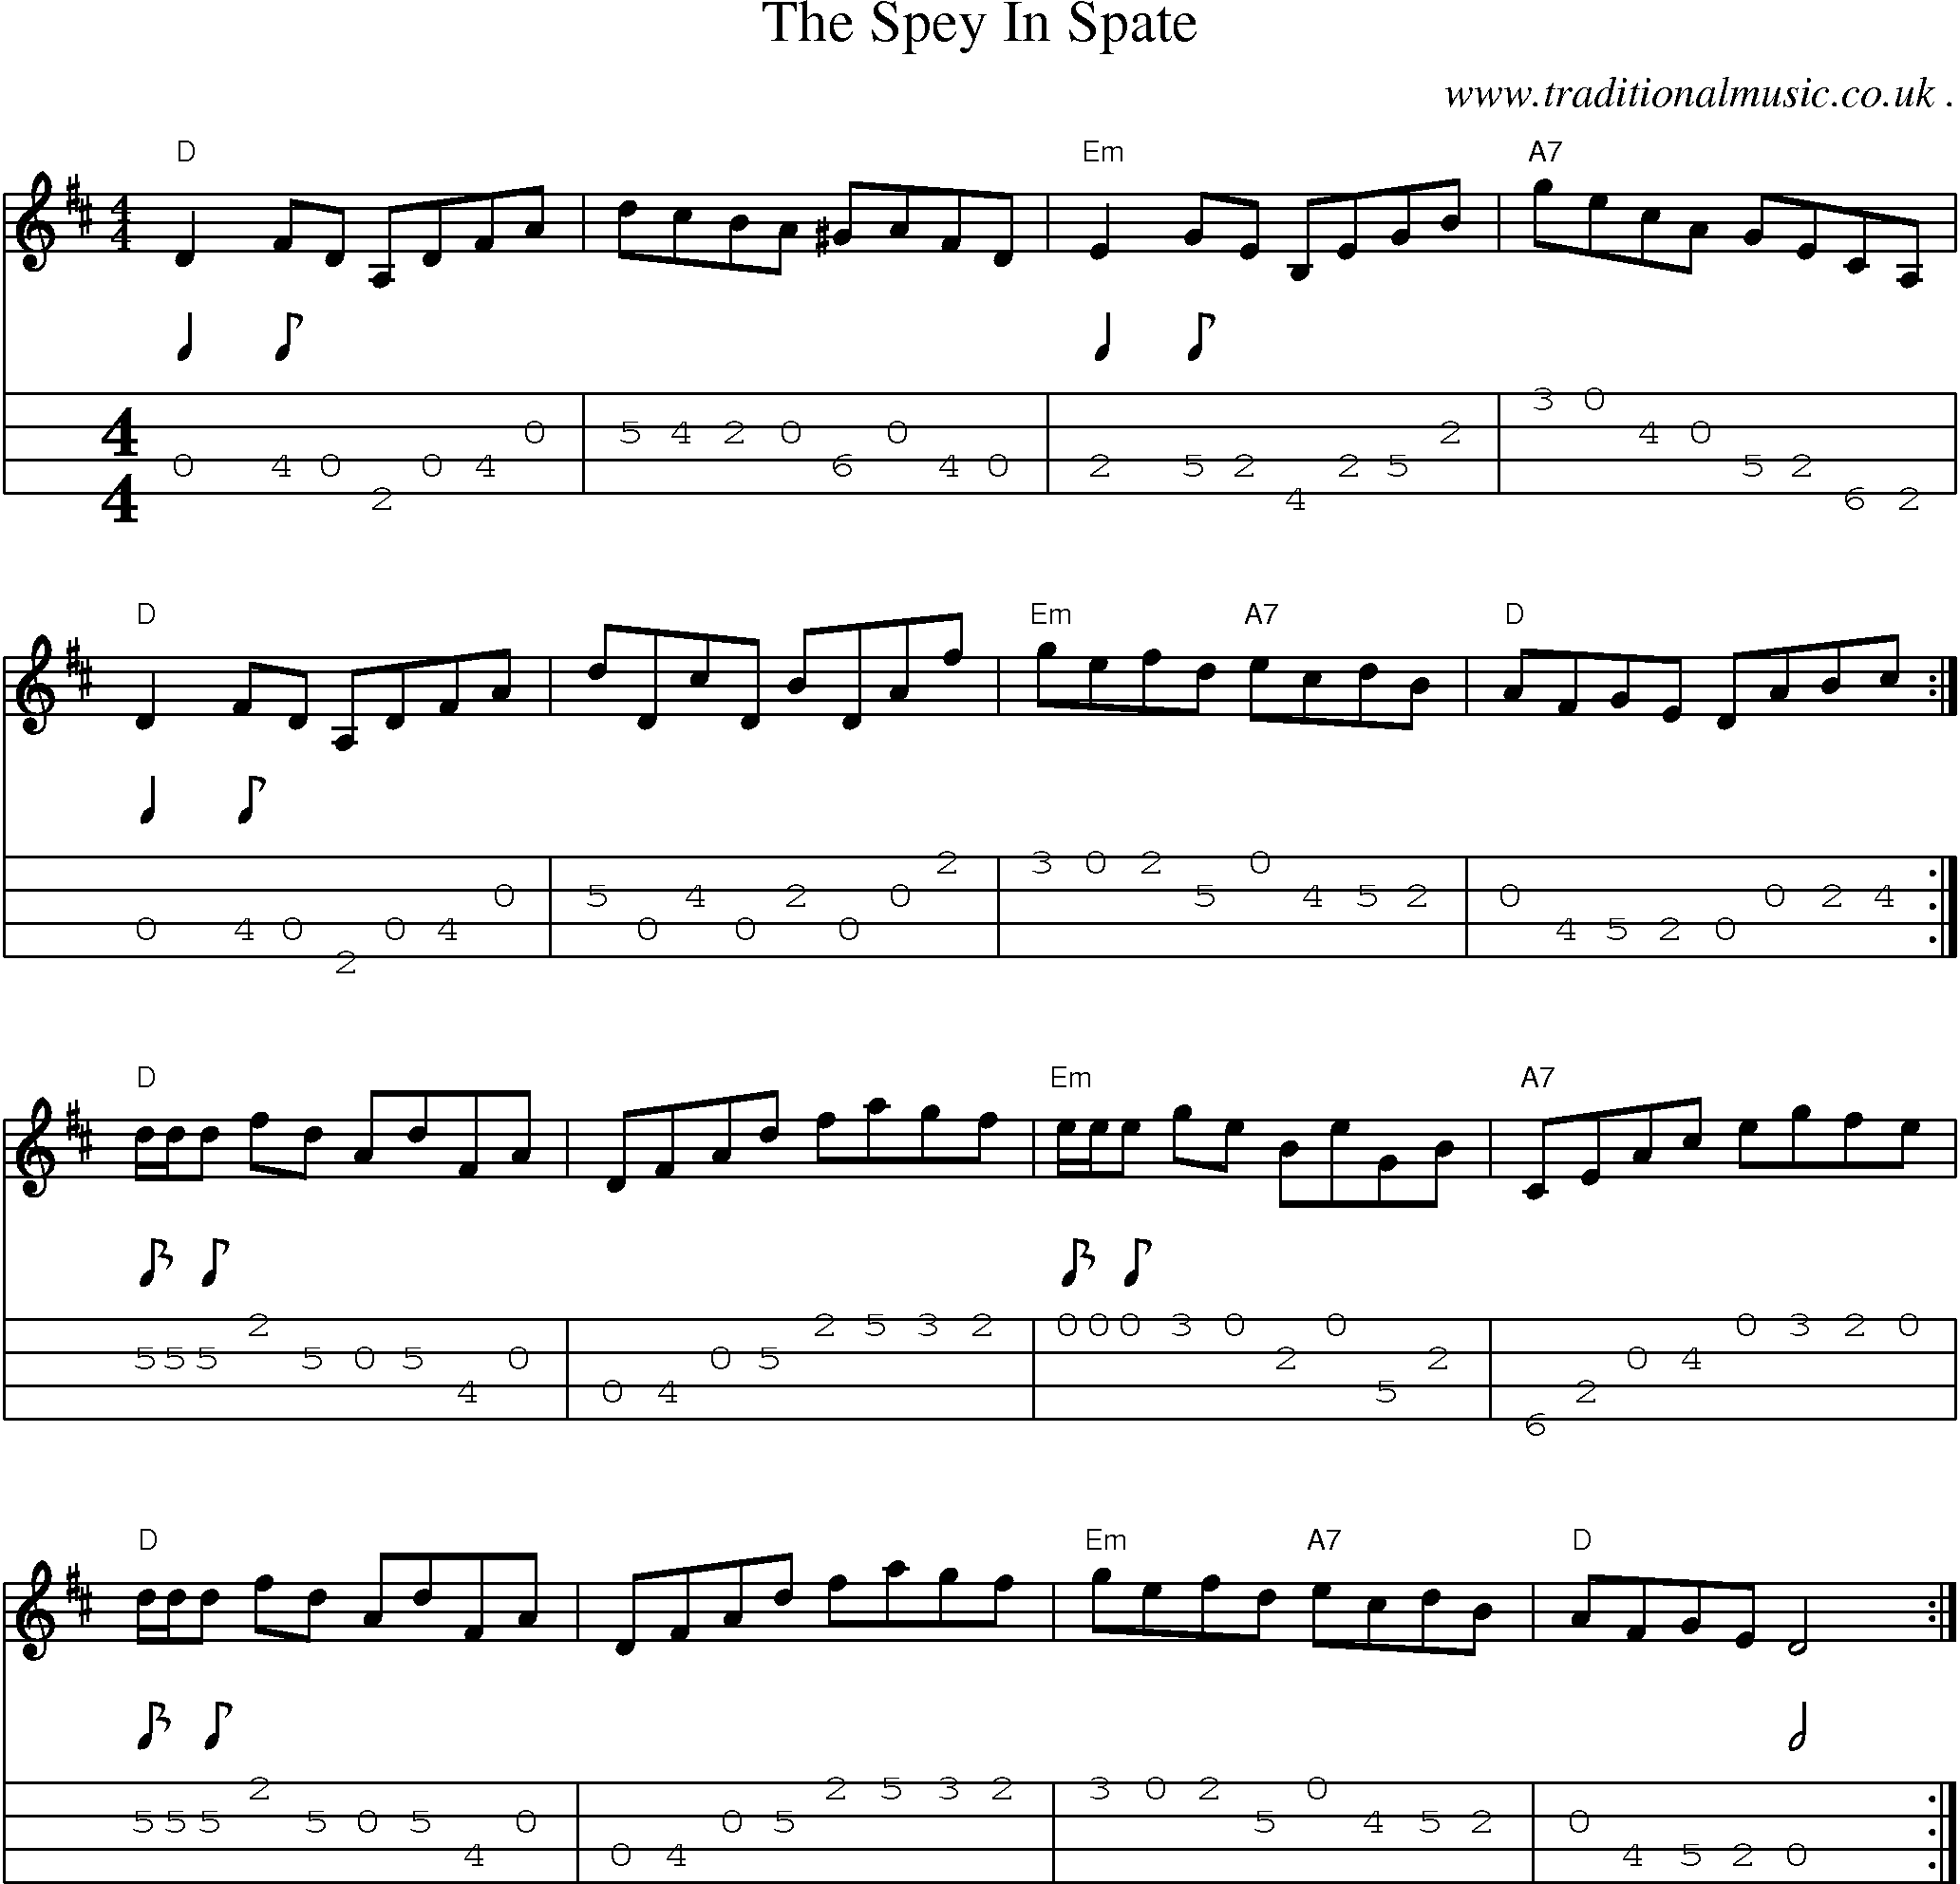 Music Score and Guitar Tabs for The Spey In Spate